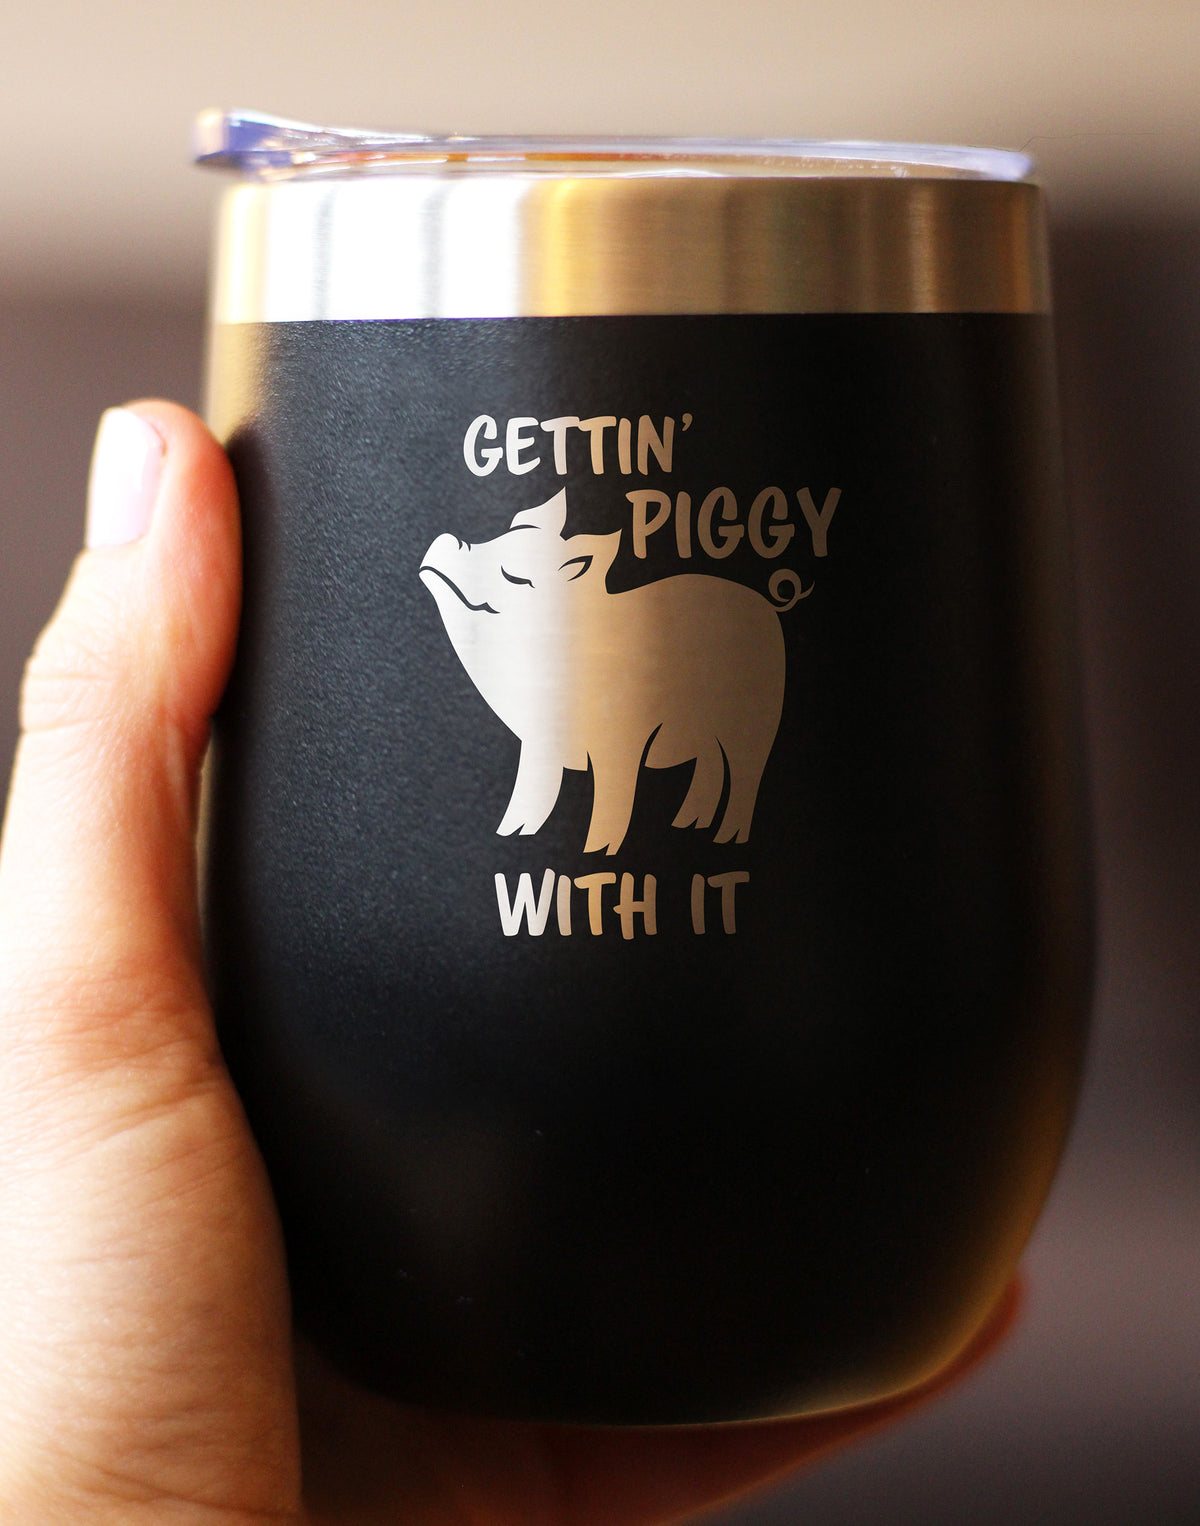 Gettin Piggy - Wine Tumbler Glass with Sliding Lid - Stainless Steel Insulated Mug - Cute Pig Decor Gifts